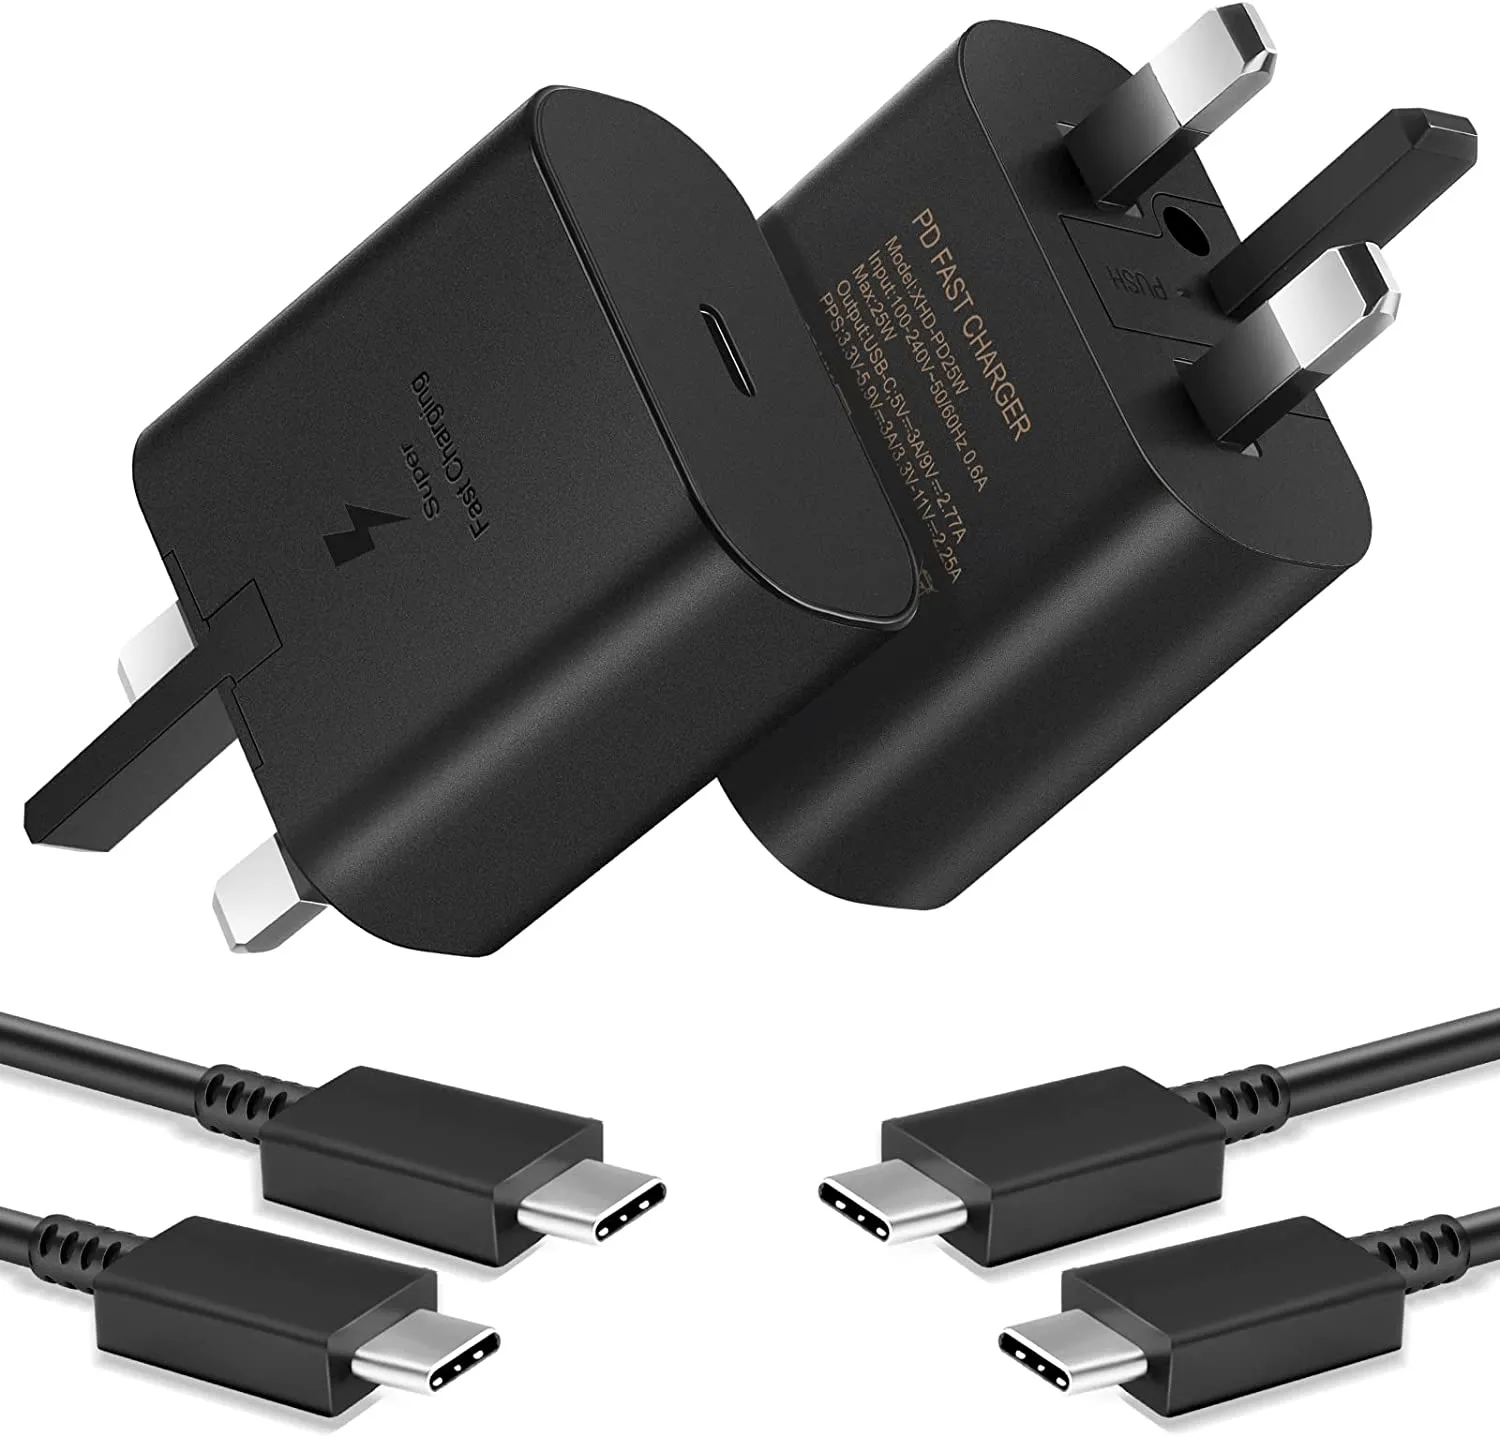 USB C Charger, Samsung Charger with 2M USB C to USB C Cable